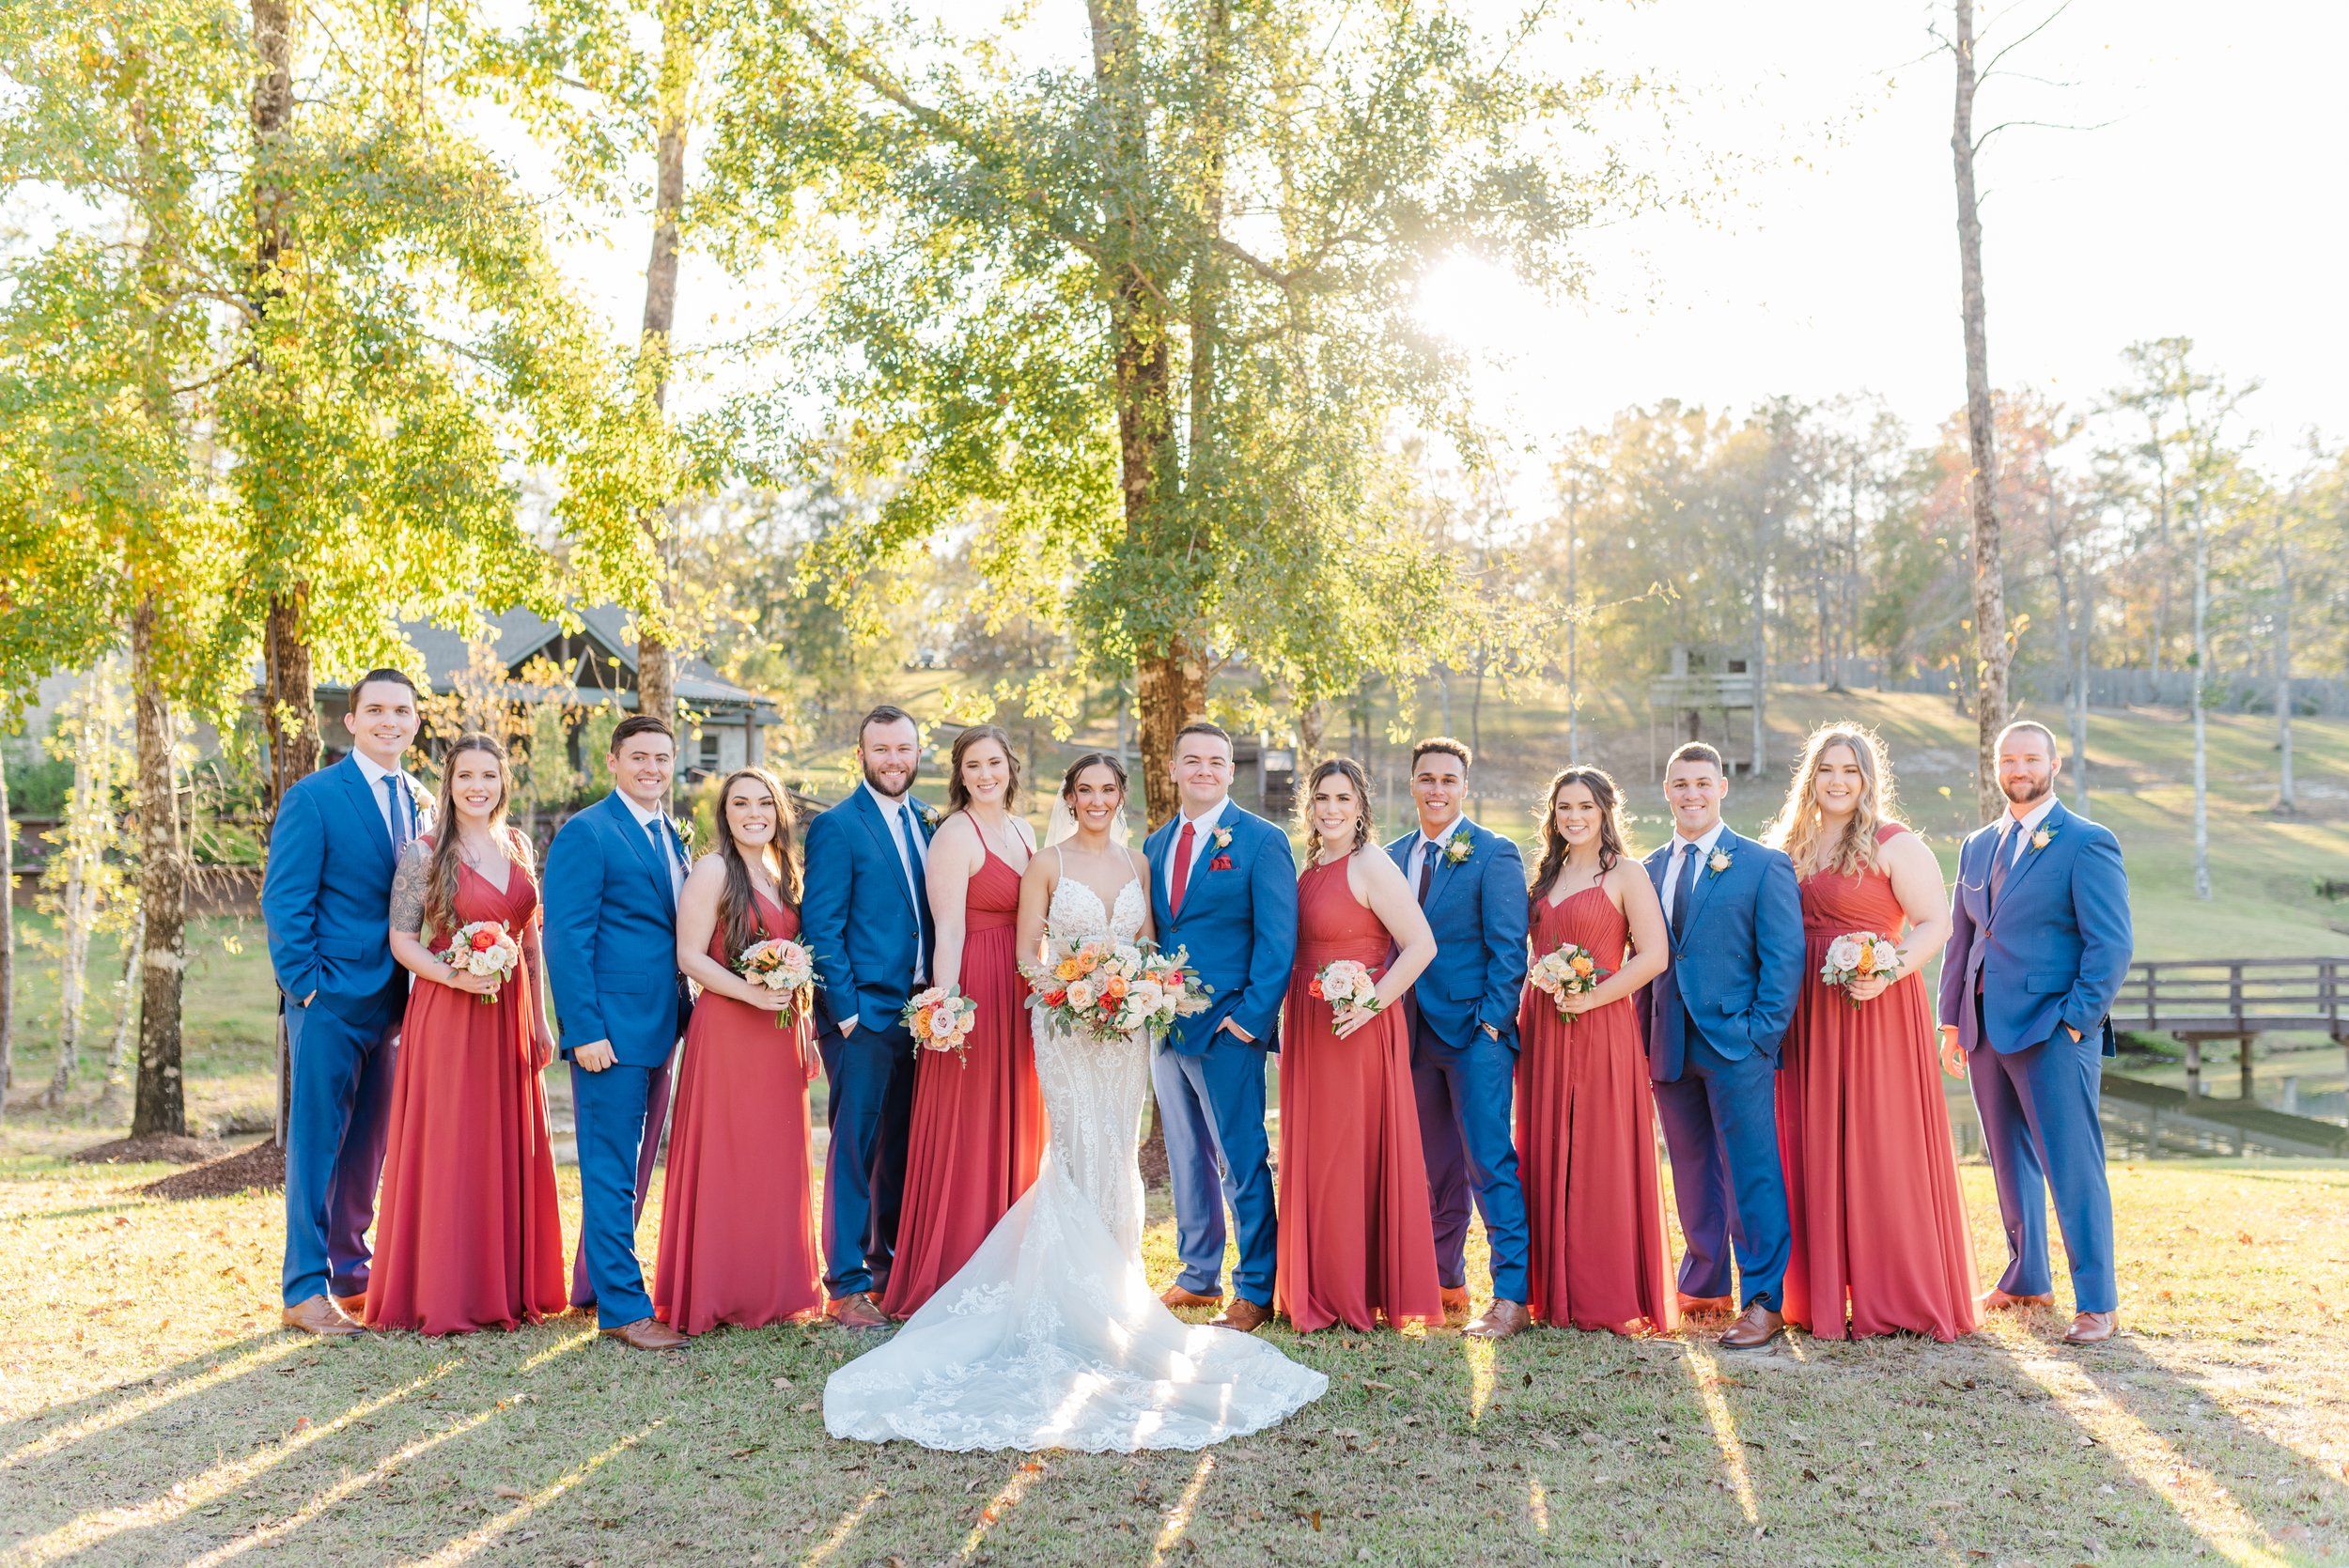 Fall Izenstone Spanish Fort Alabama Wedding in November Photographed by Kristen Marcus Photography